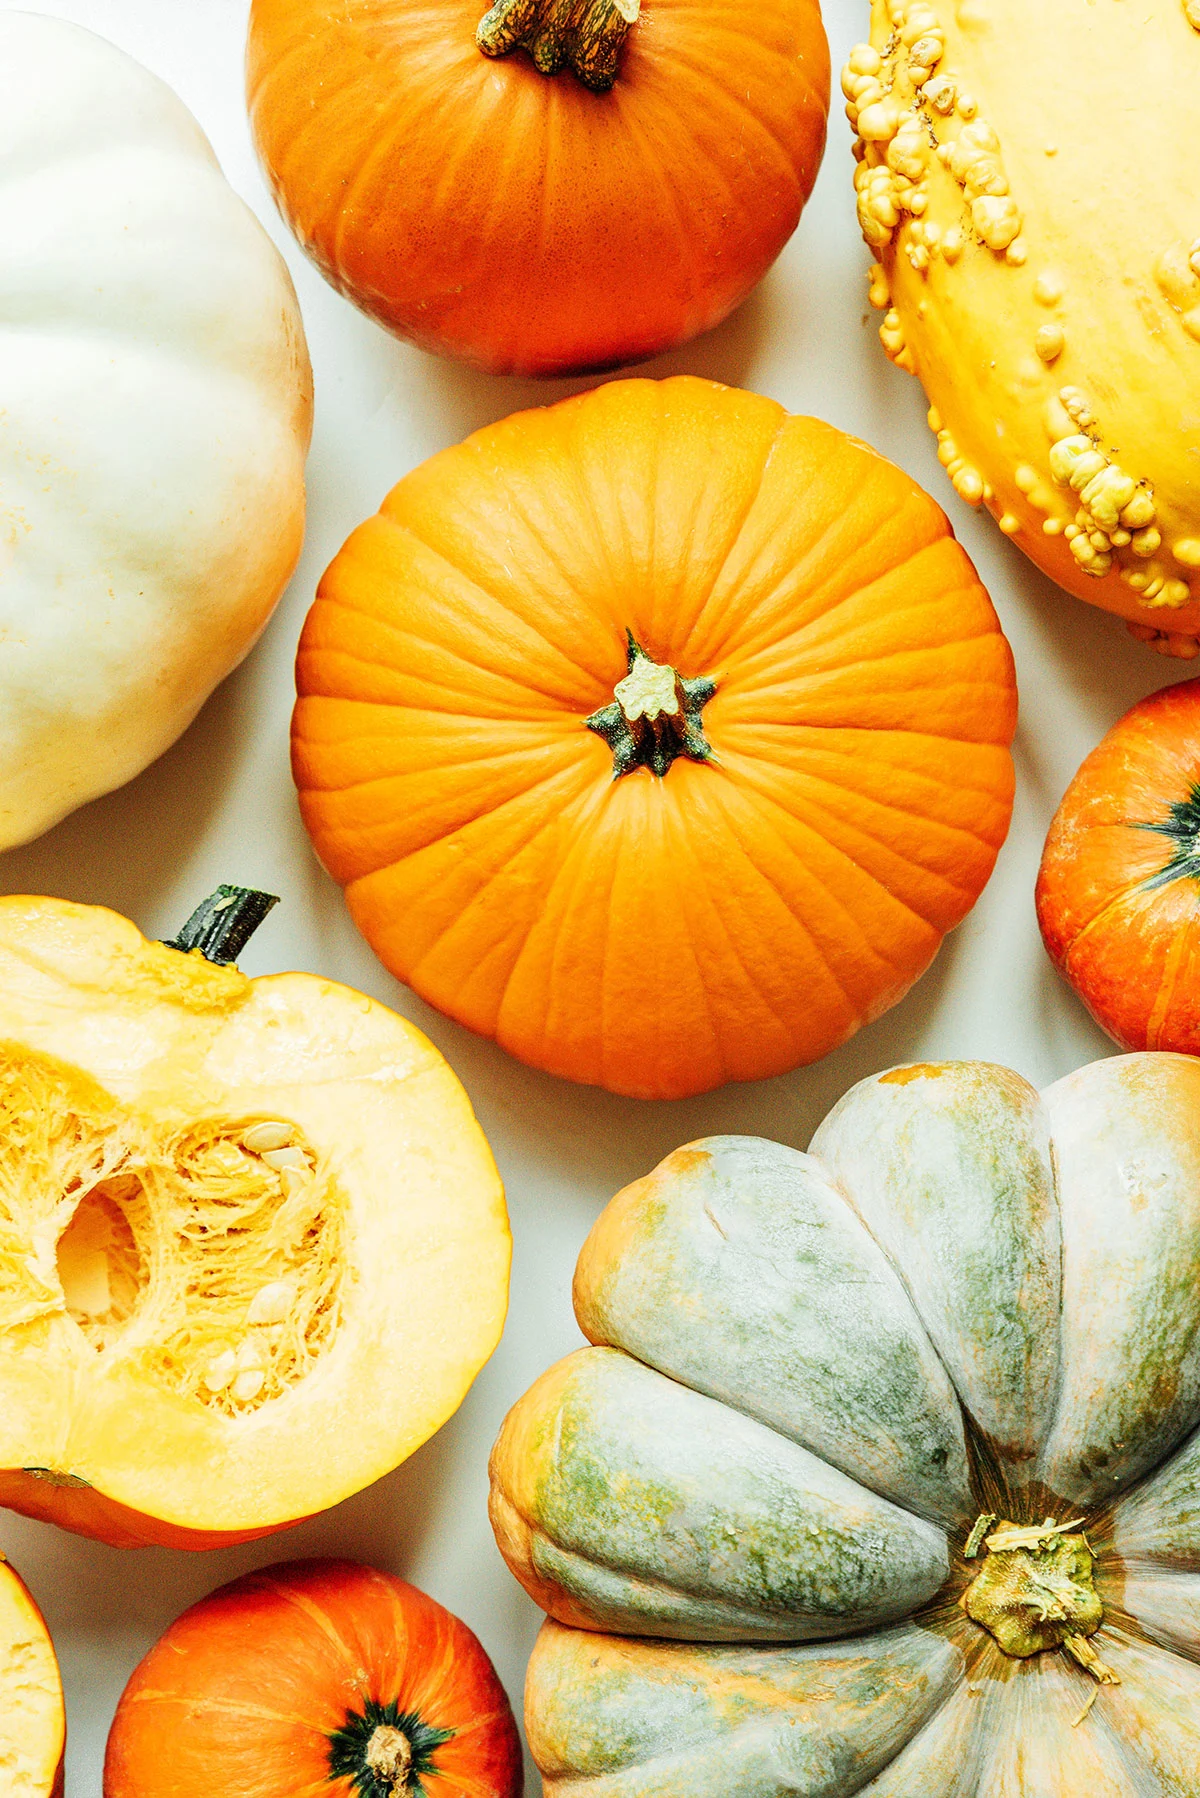 Many types of pumpkins.